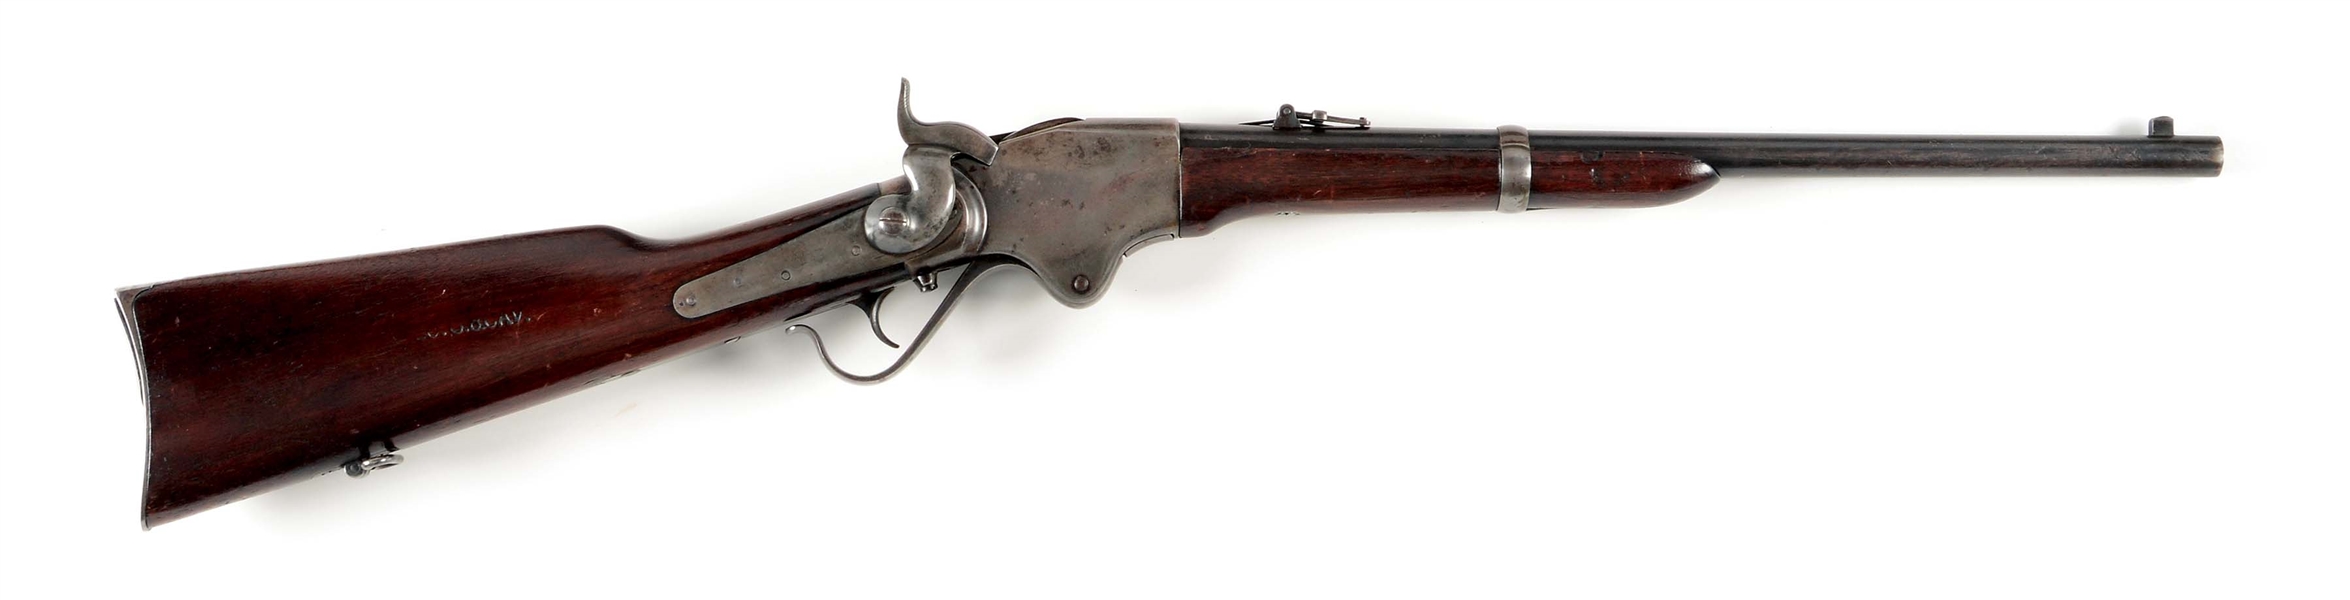 (A) COMPANY G 8TH CAVALRY SPENCER MODEL 1865 LEVER ACTION CARBINE.